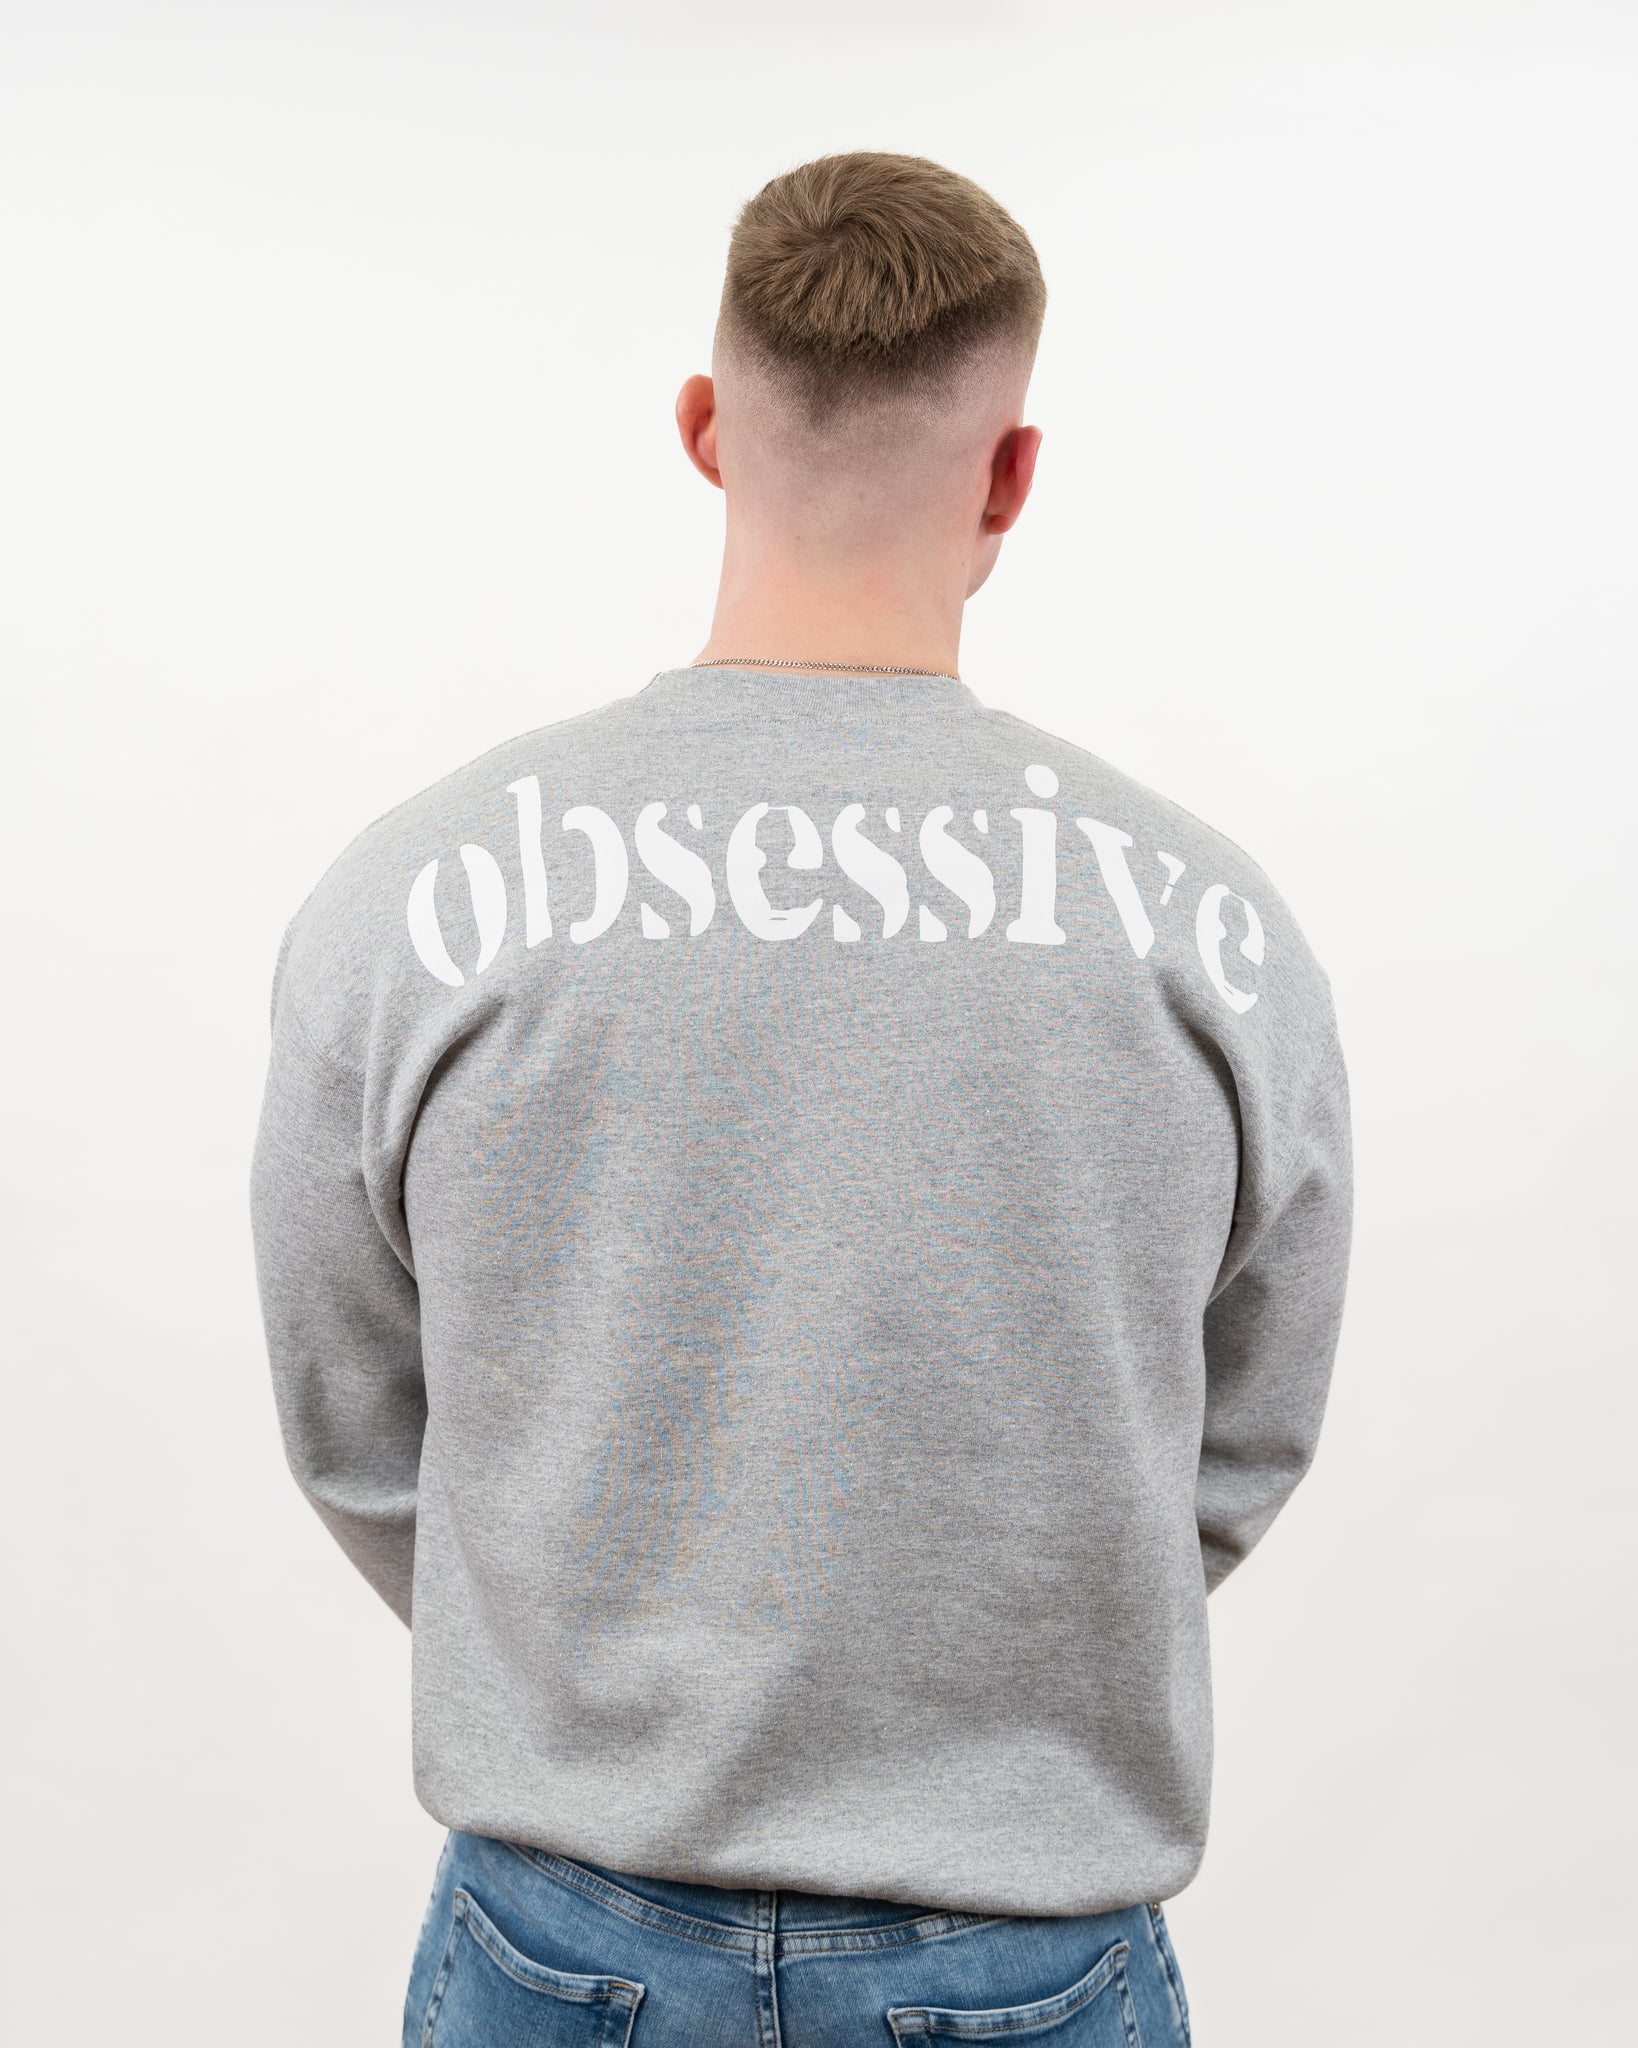 Obsessive Sweater - Gray